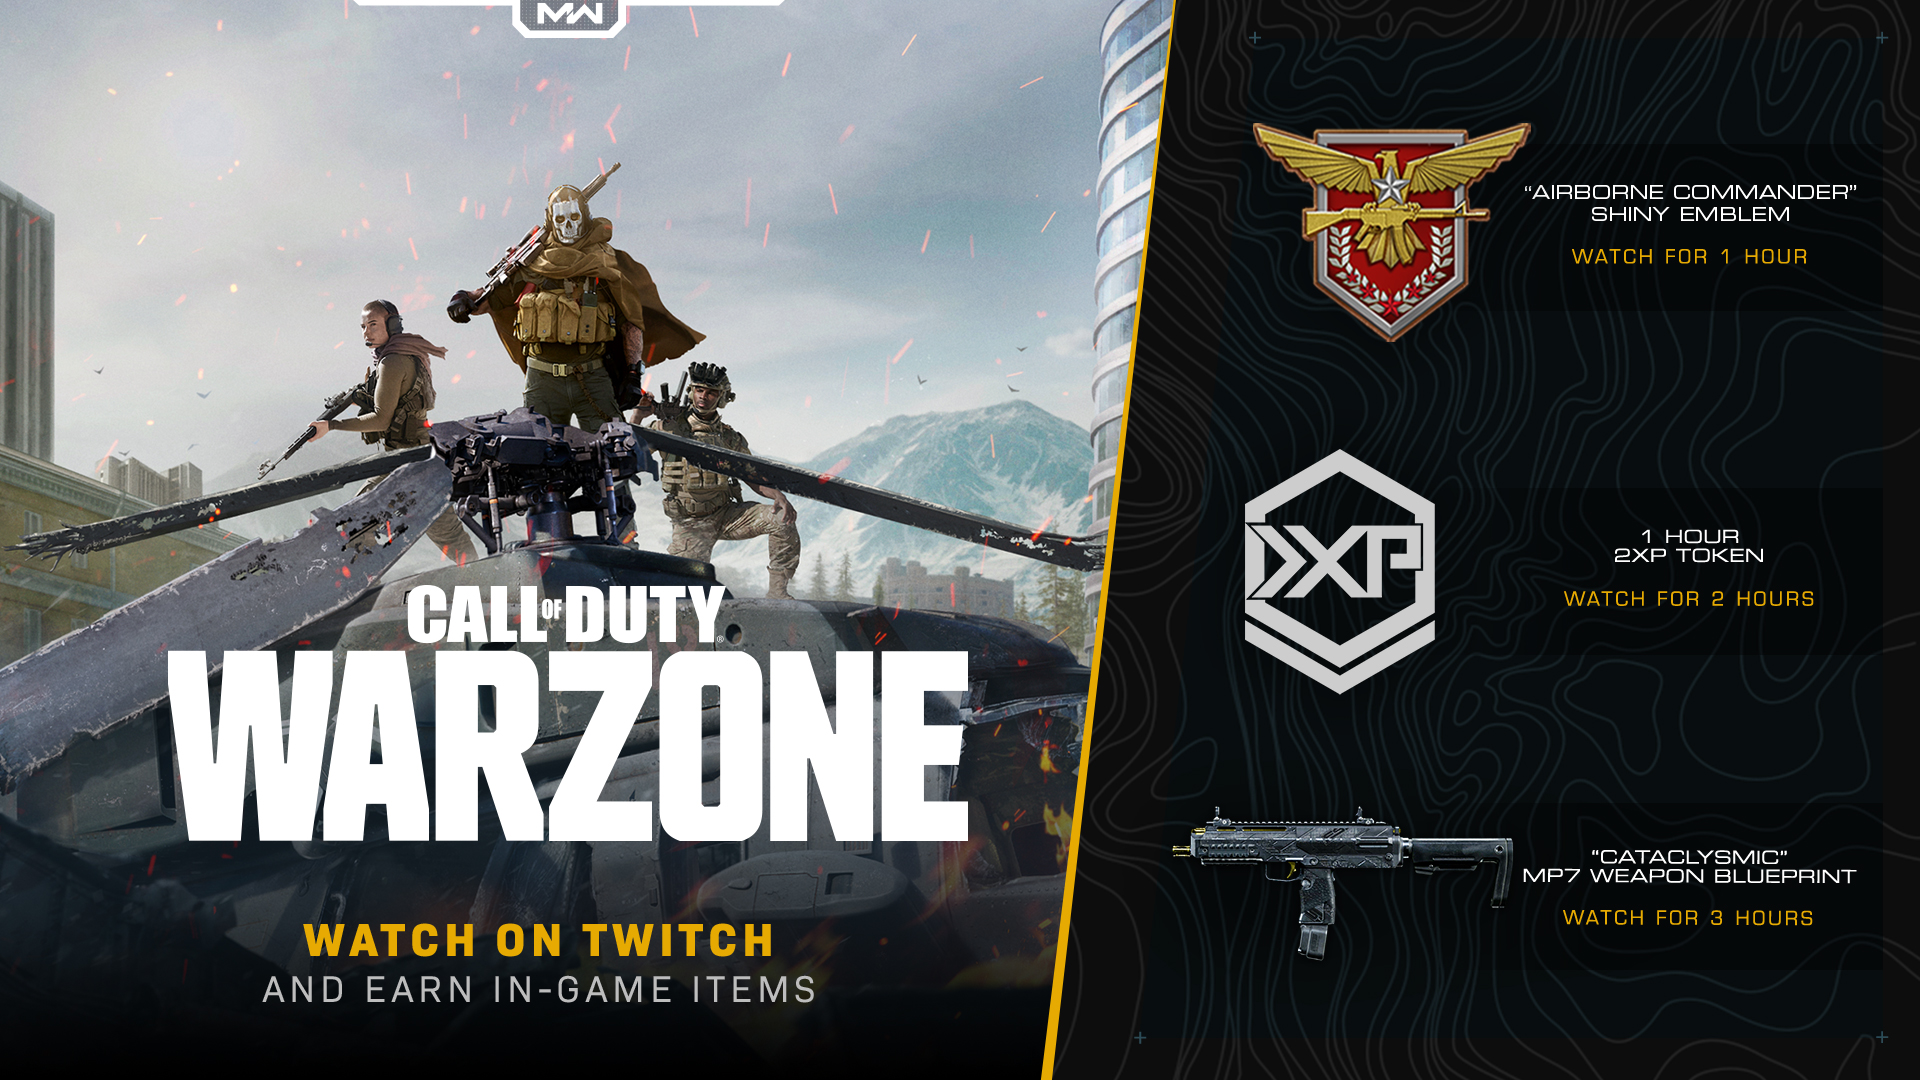 Twitch drops return for Call of Duty: Warzone.